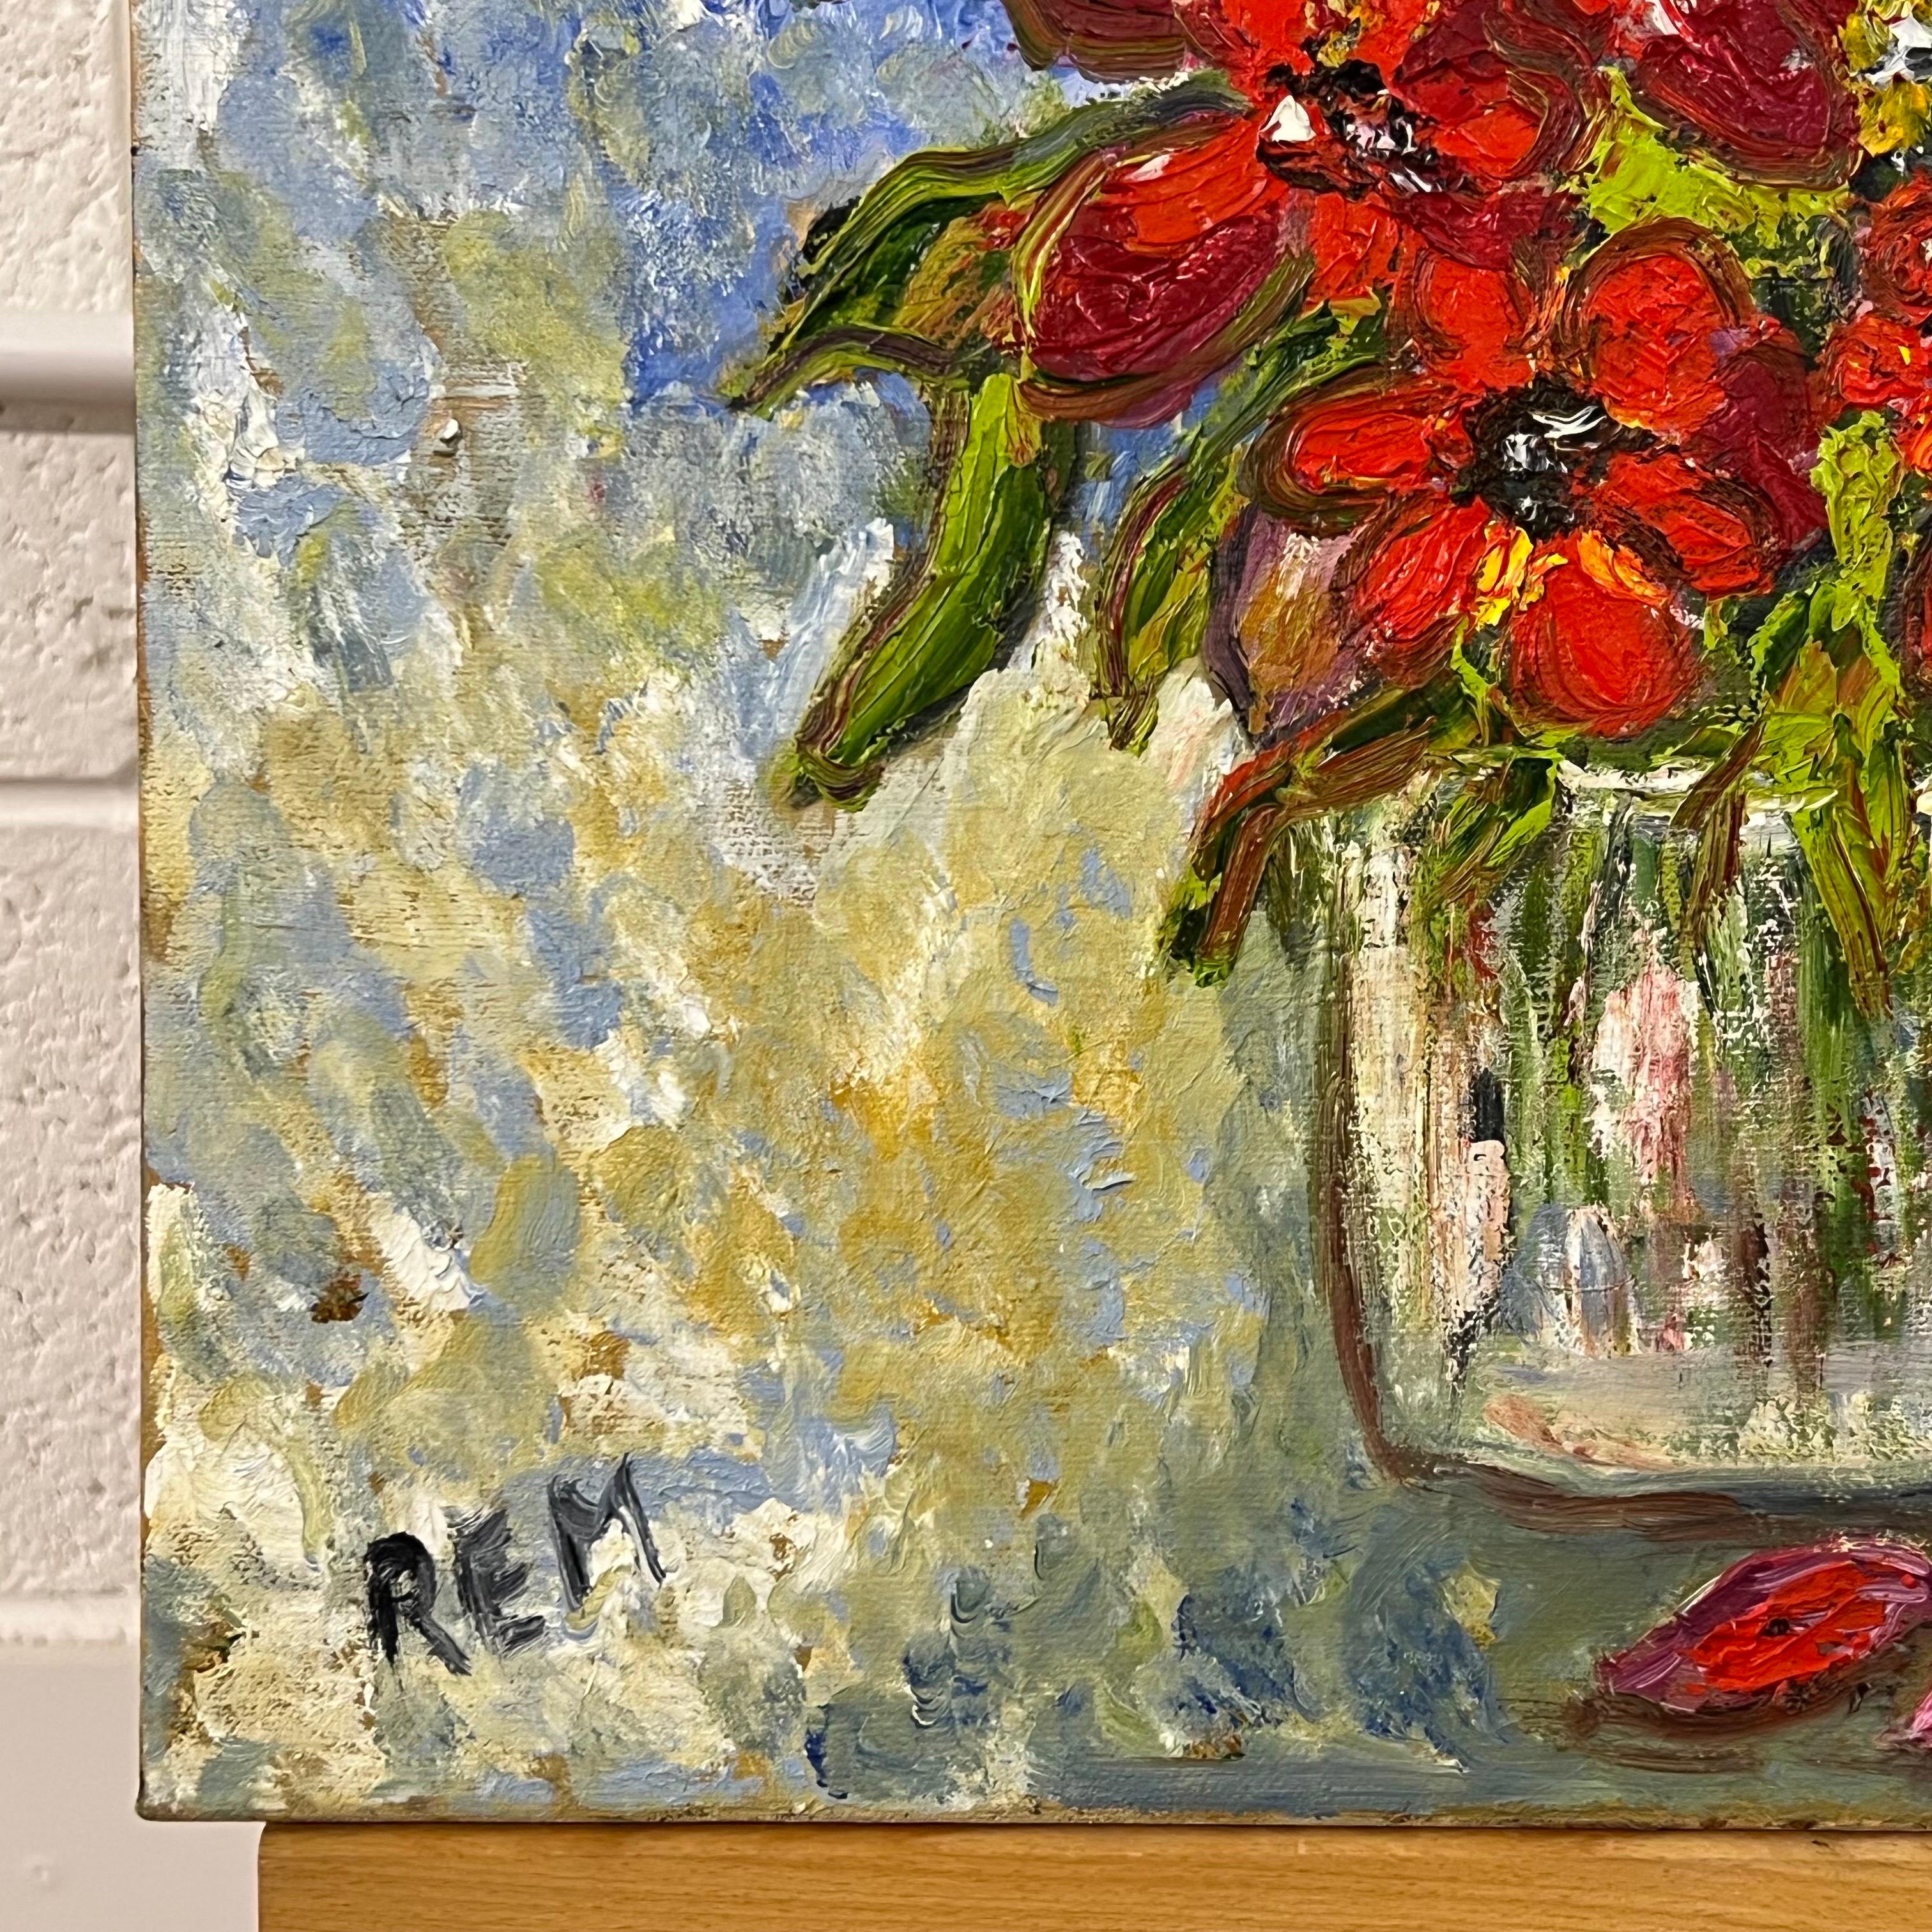 Expressive Still Life Painting Red Rose Flowers 'Red for Love' by British Artist For Sale 3